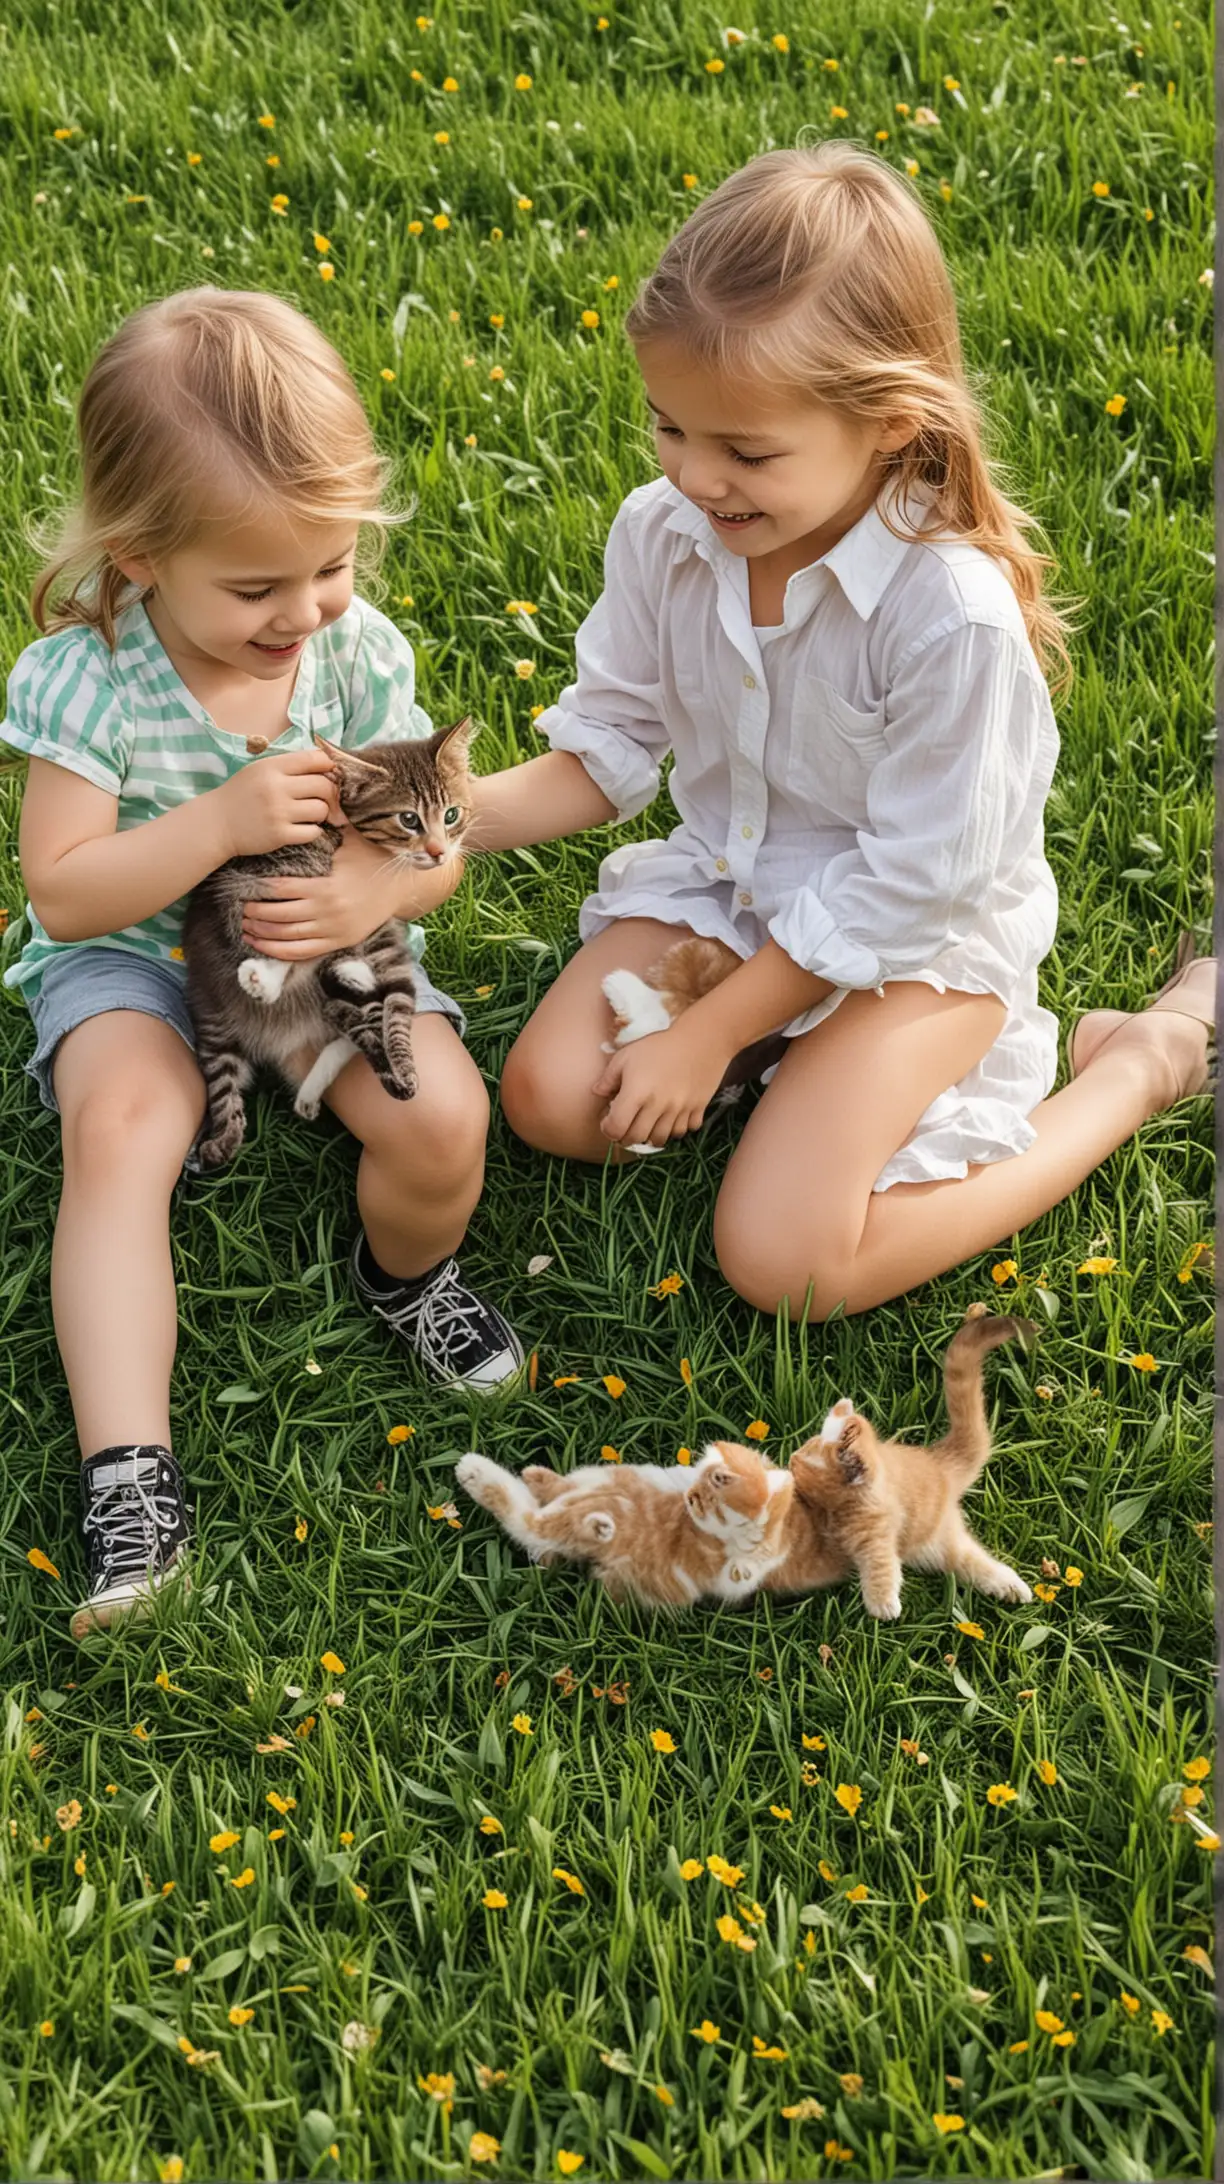 Children Playing with Kittens on Green Grass